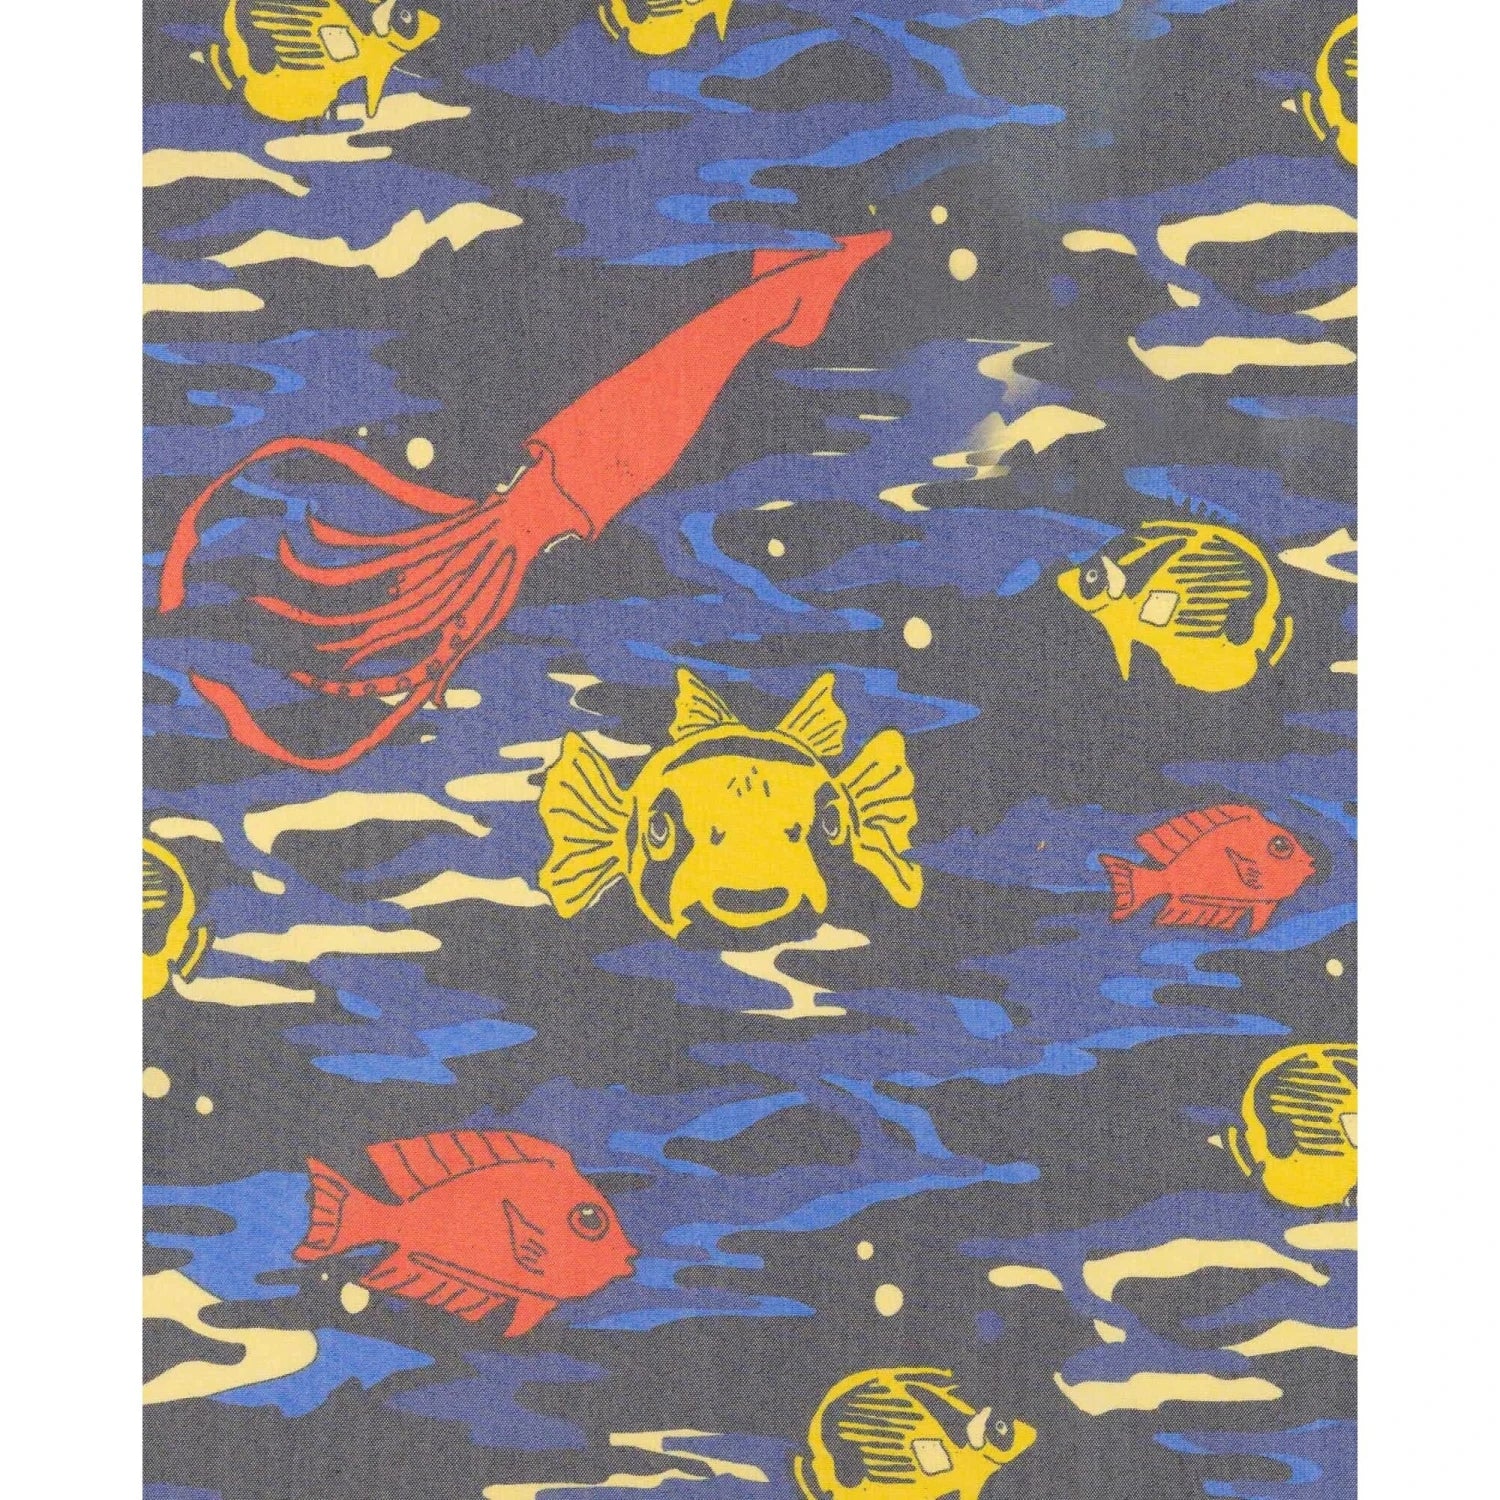 Toad&Co M's Boundless Pull-On Short, Sea Blue Fish Print, view of fabric